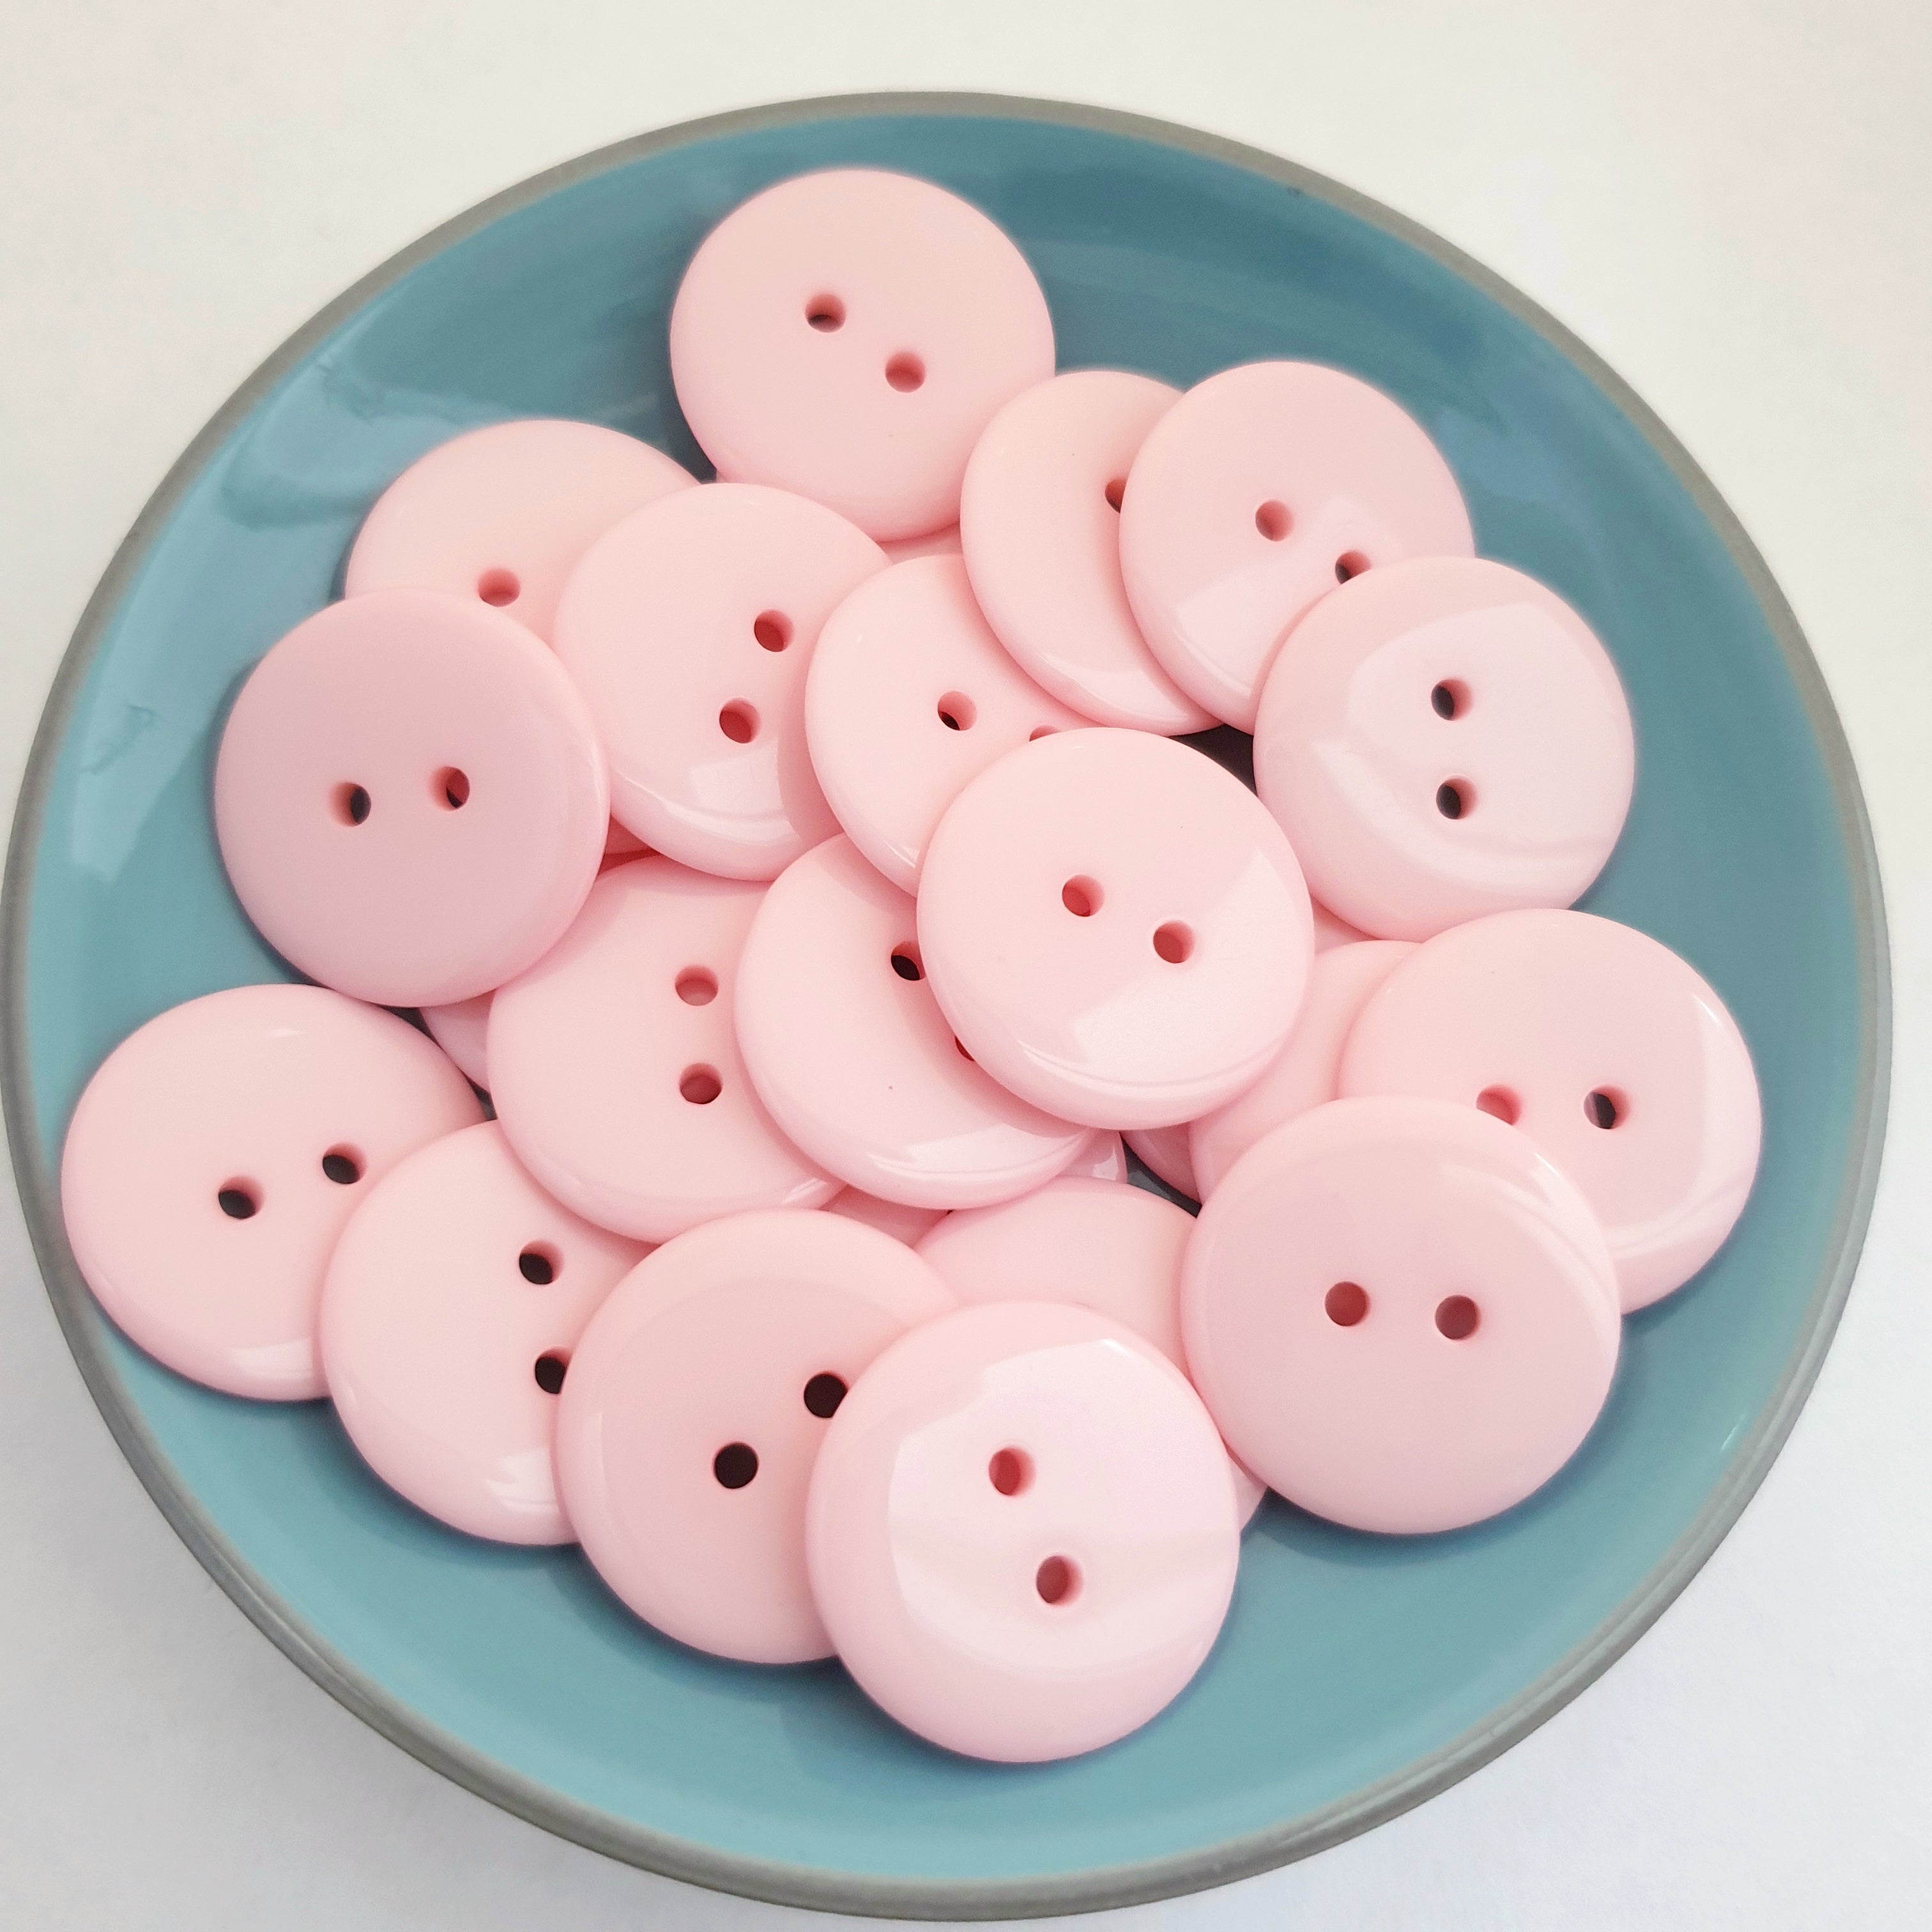 MajorCrafts 36pcs 23mm Light Pink 2 Holes Round Large Resin Sewing Buttons